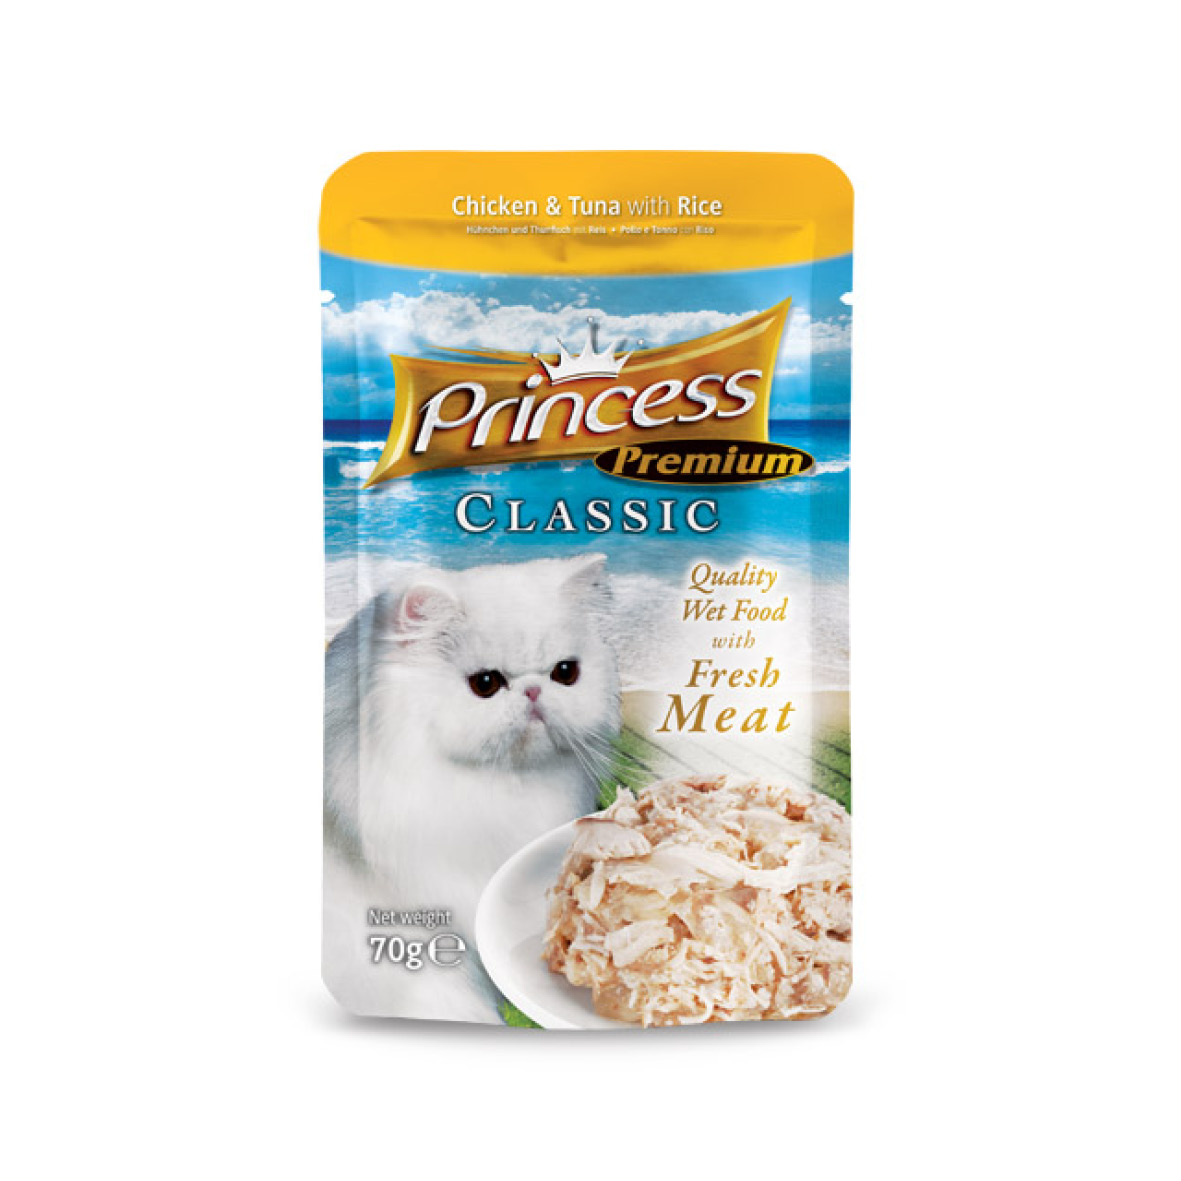 Princess Classic Premium Chicken And Tuna With Rice 70g Whats Instore